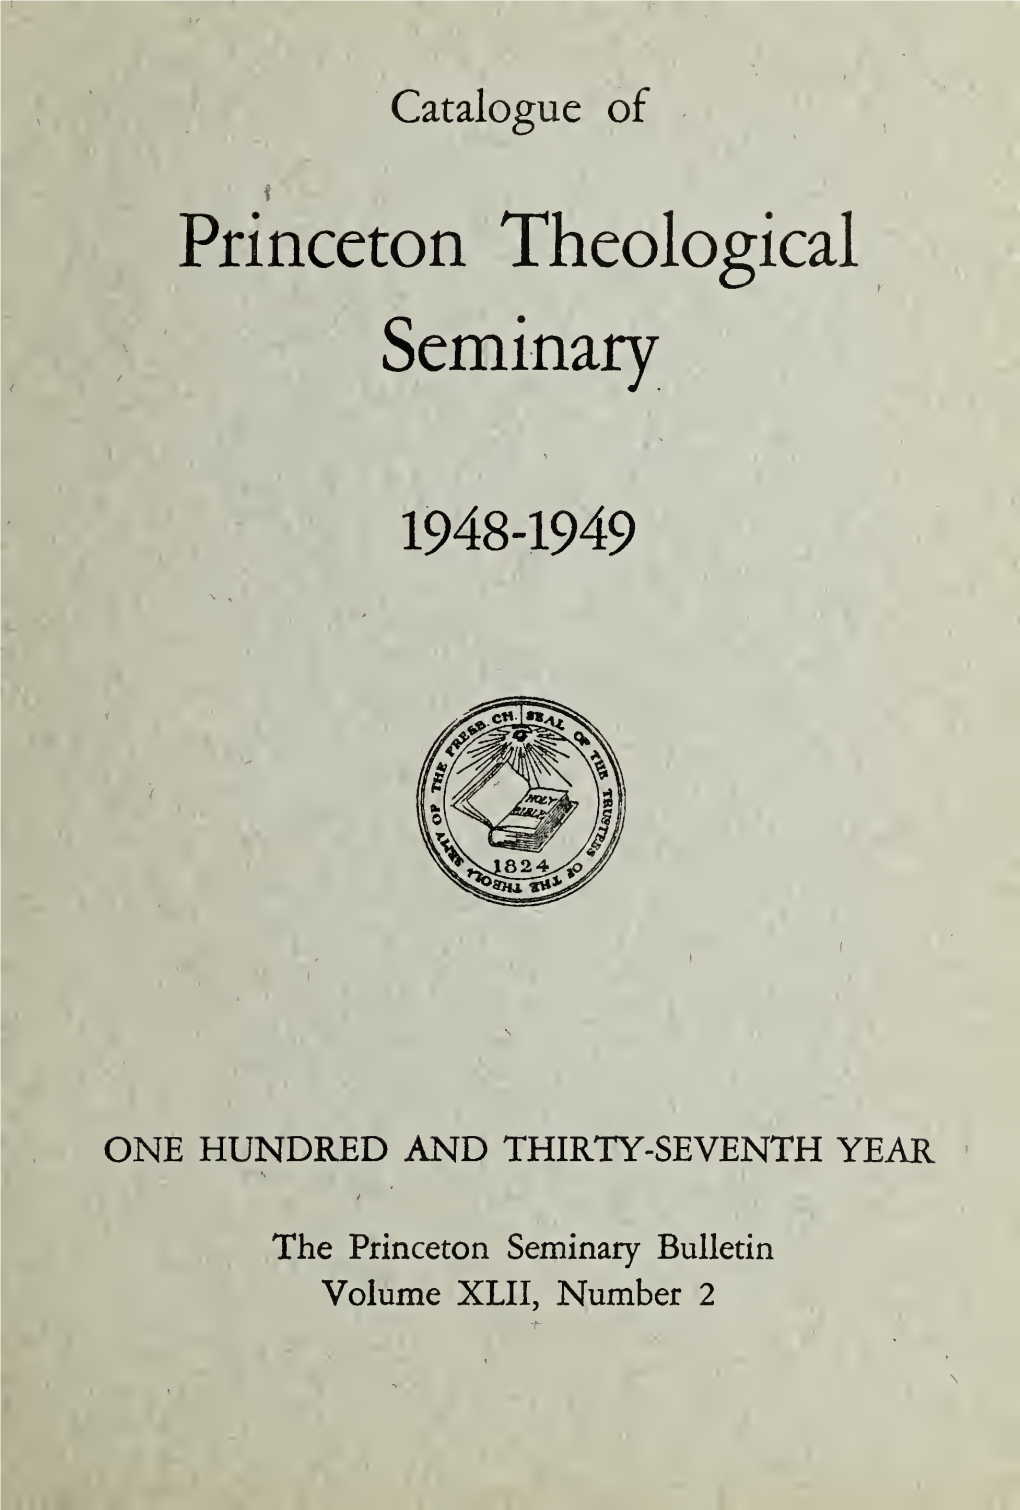 The Princeton Seminary Bulletin Volume XLII, Number 2 Published Quarterly by the Trustees of the Theo¬ Logical Seminary of the Presbyterian Church